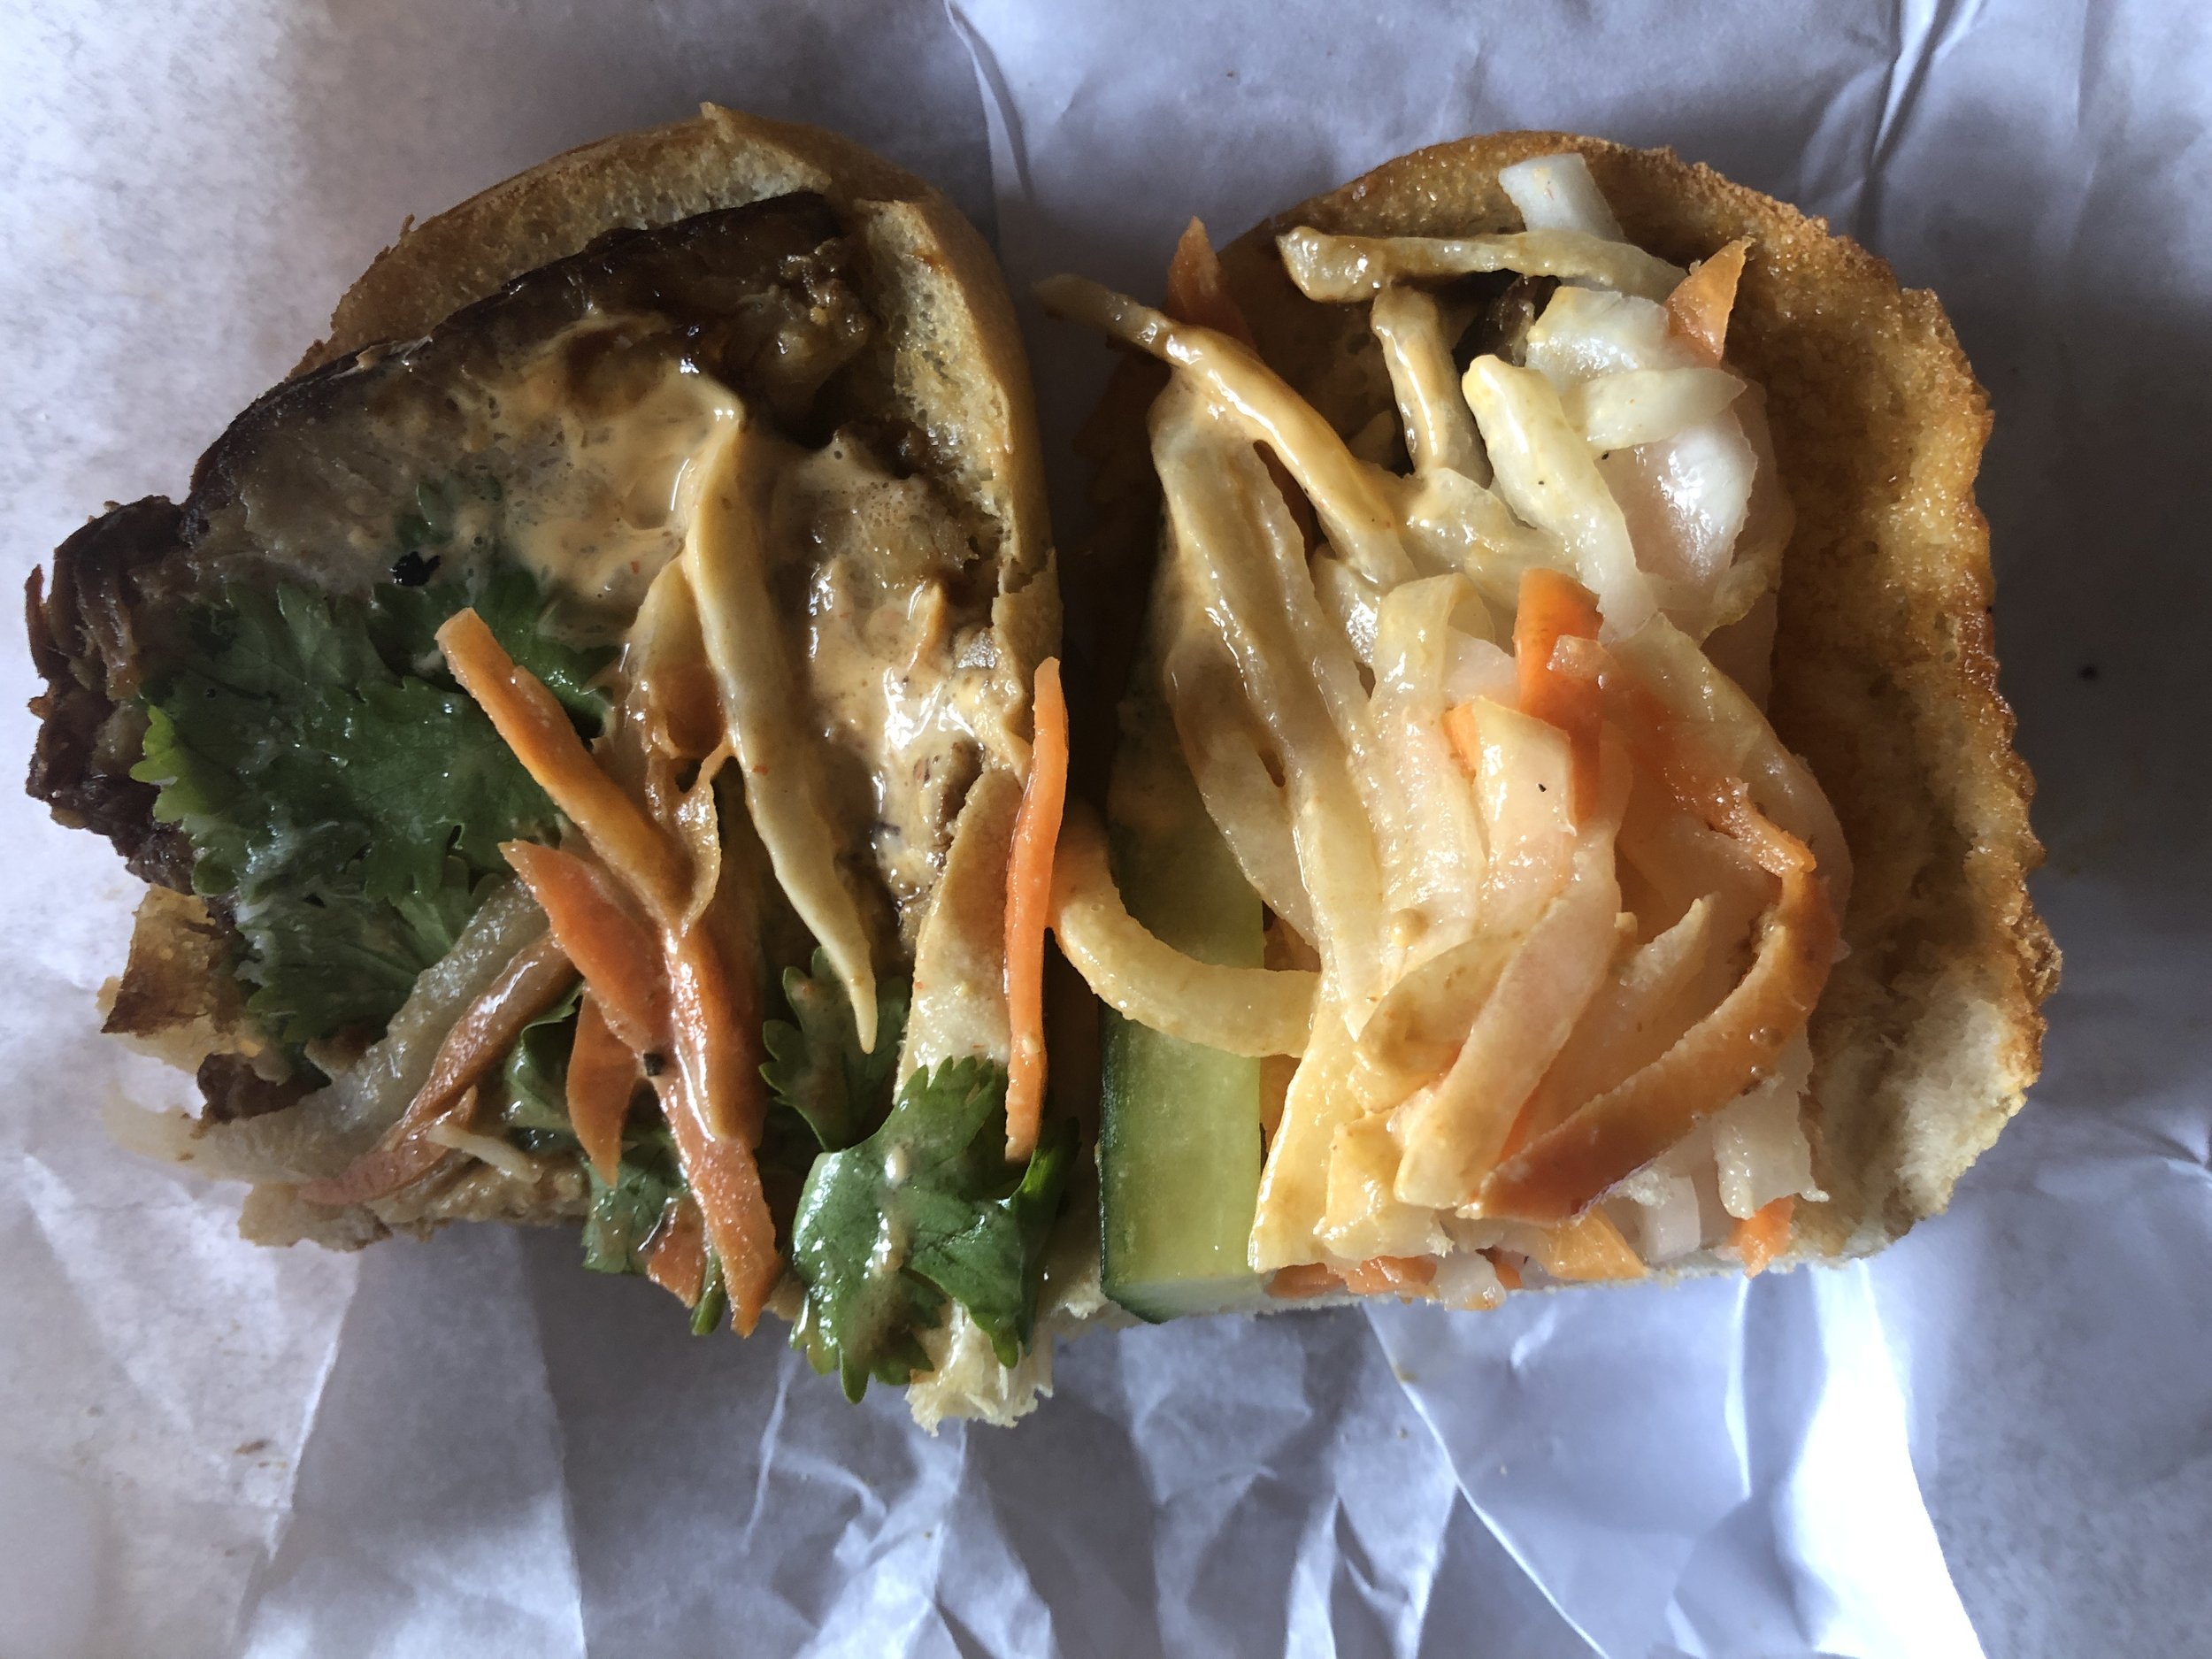 In depth look at a mostly eaten pork belly banh mi, meat on left, veggies mainly on right